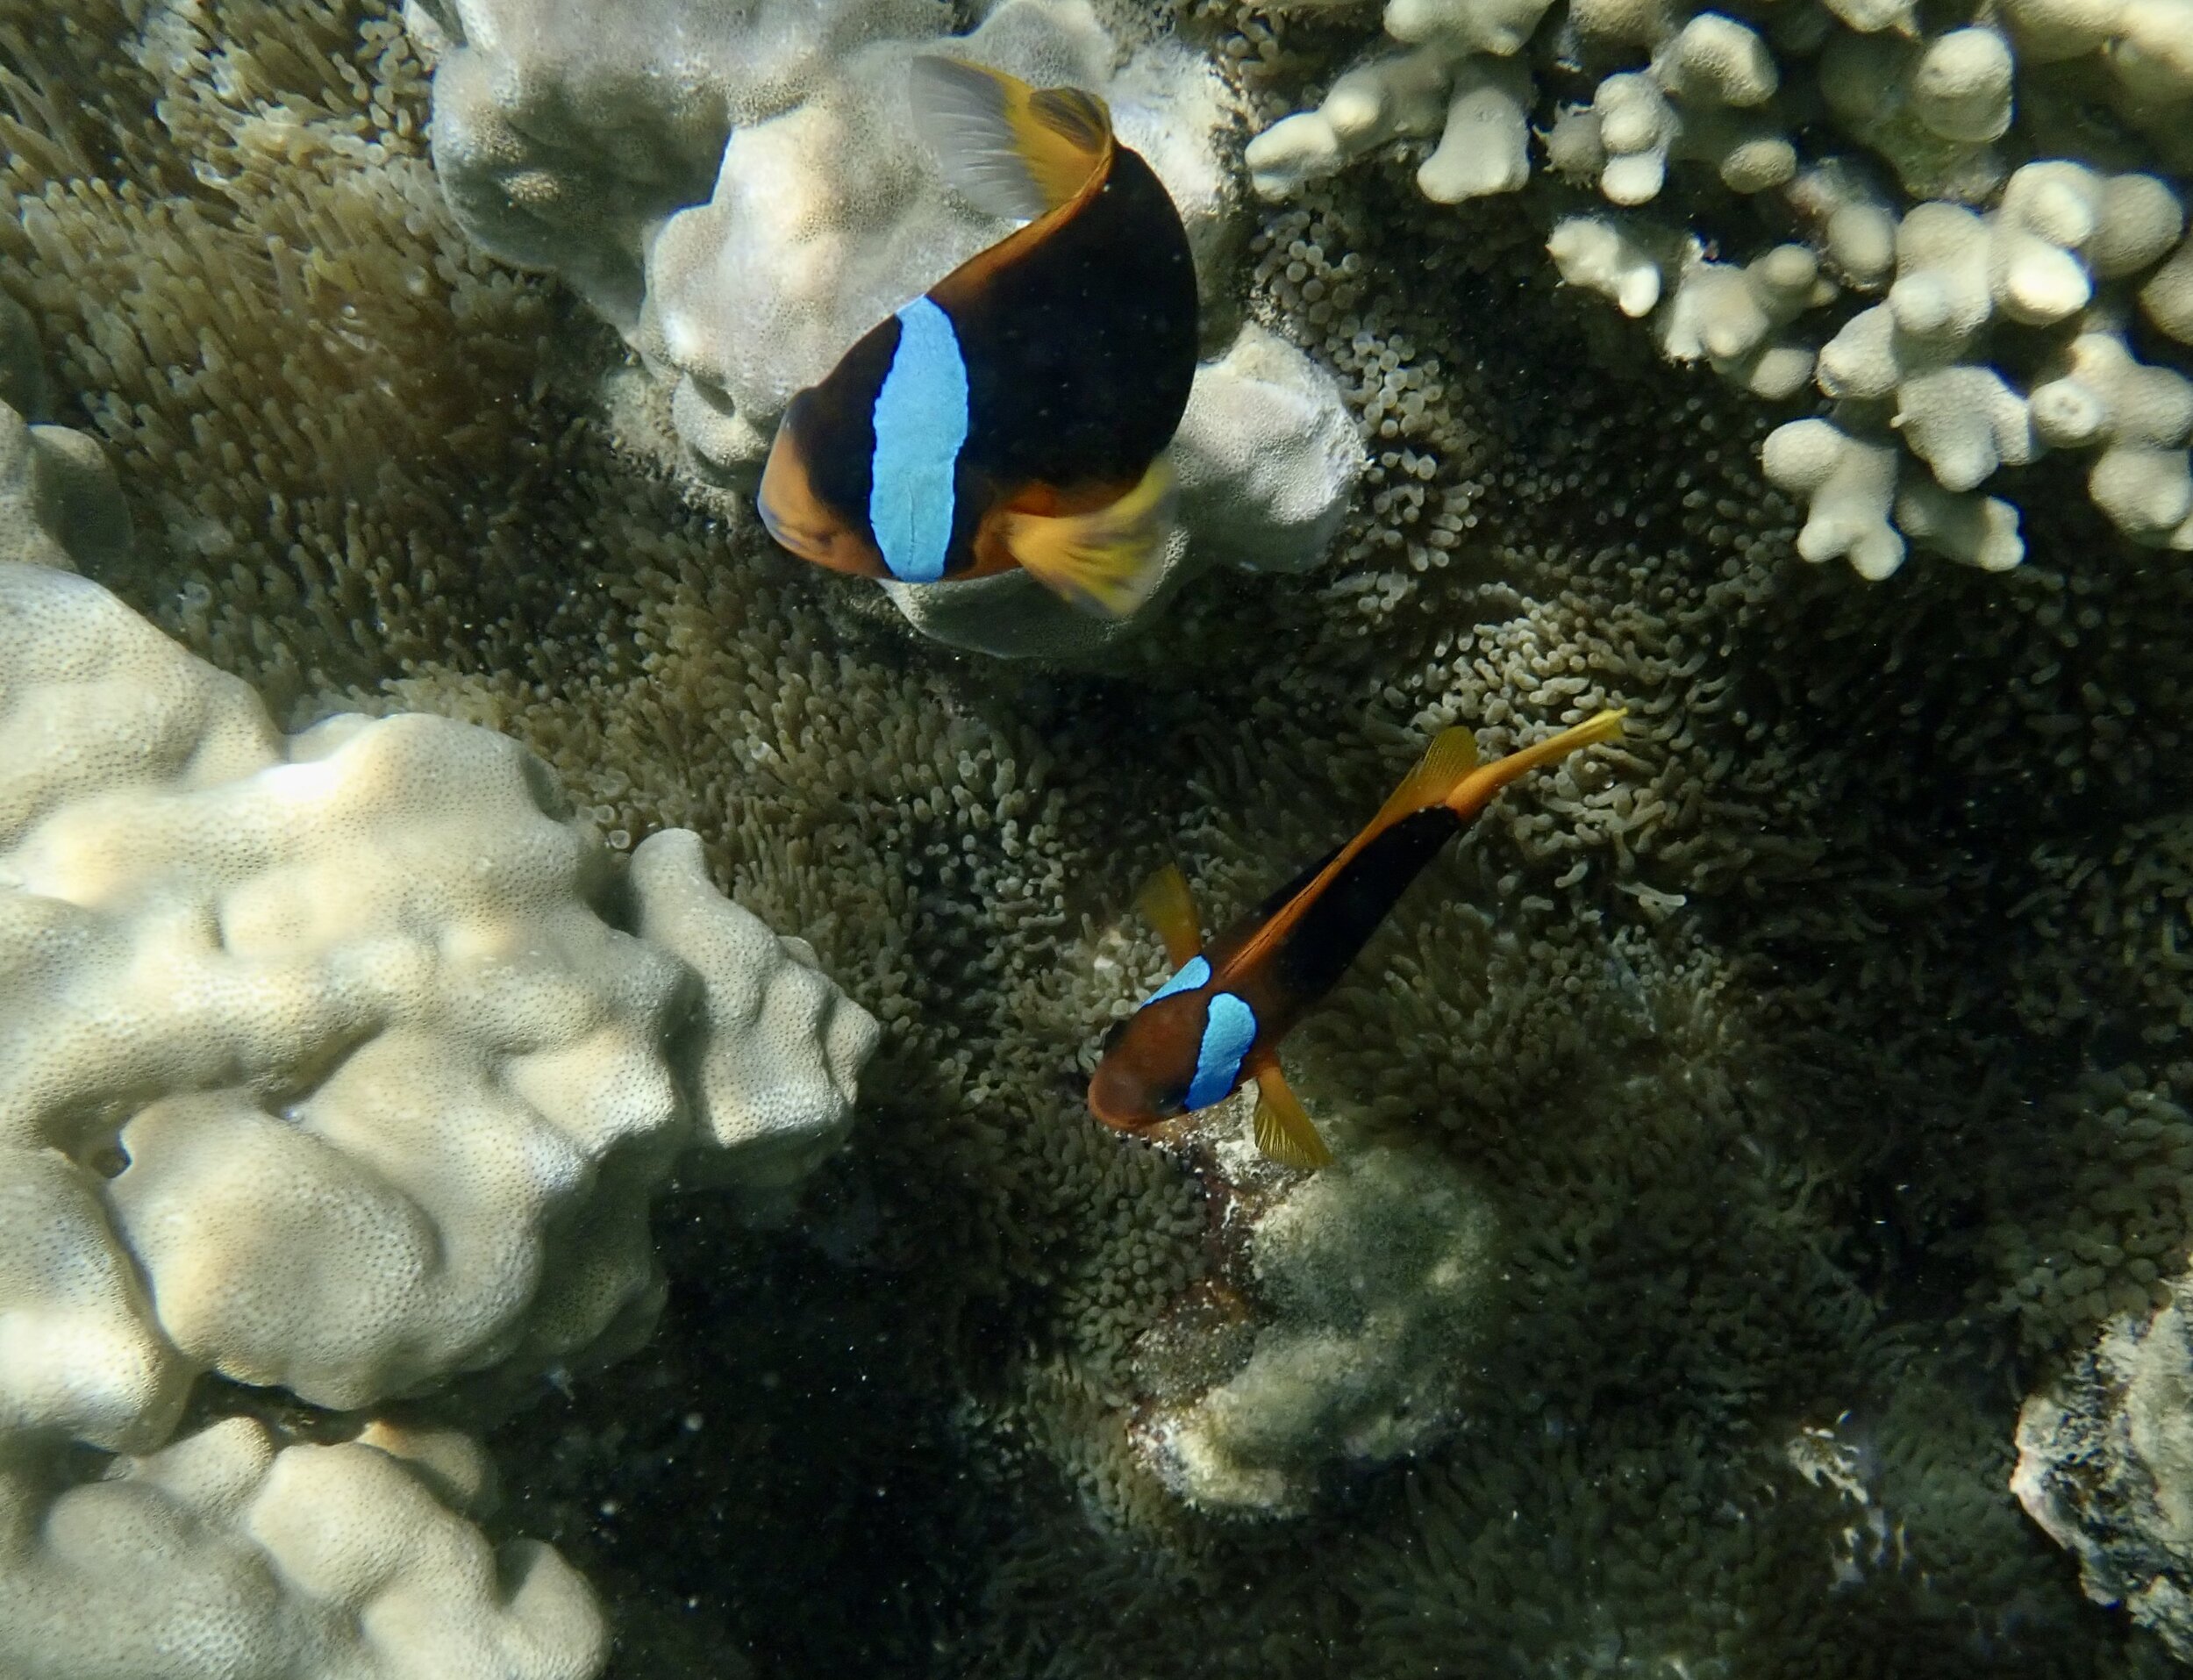 Clown Fish, Amphiprion akindynos